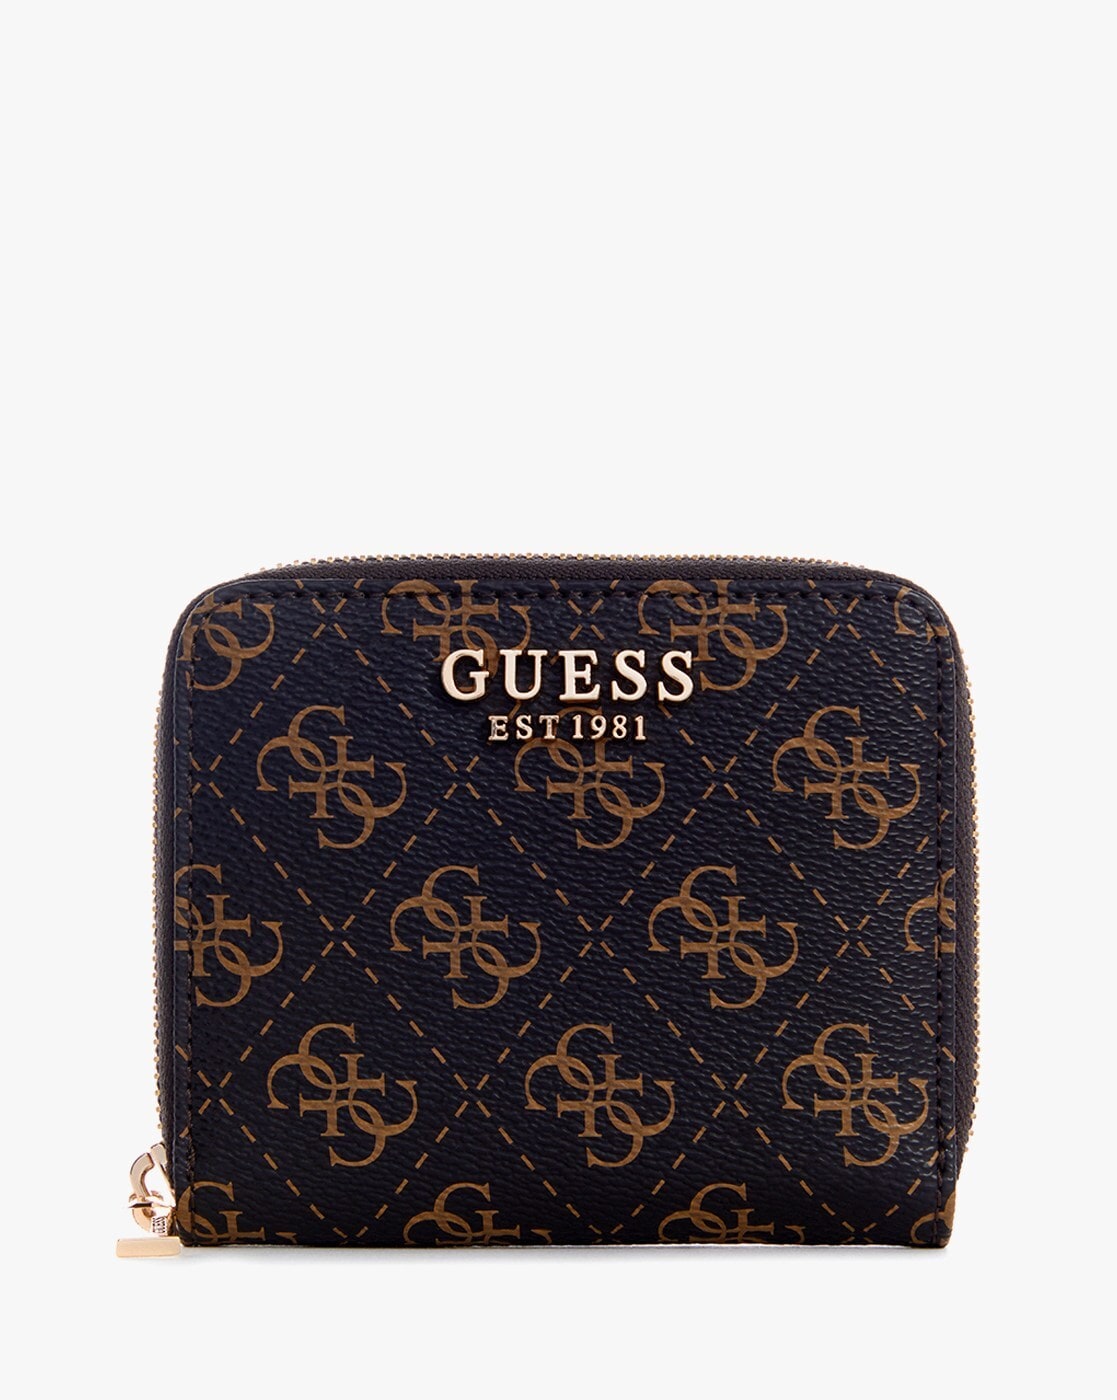 Please help me find any purses from this 2011 Guess series : r/handbags